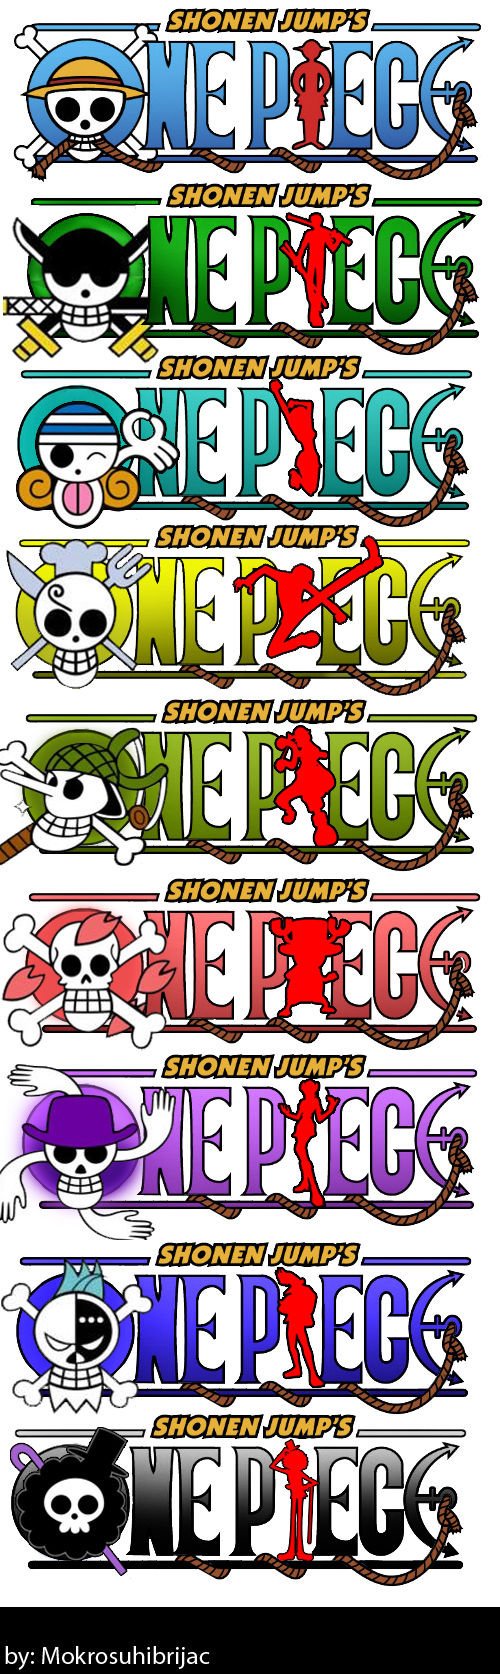 All one piece logos